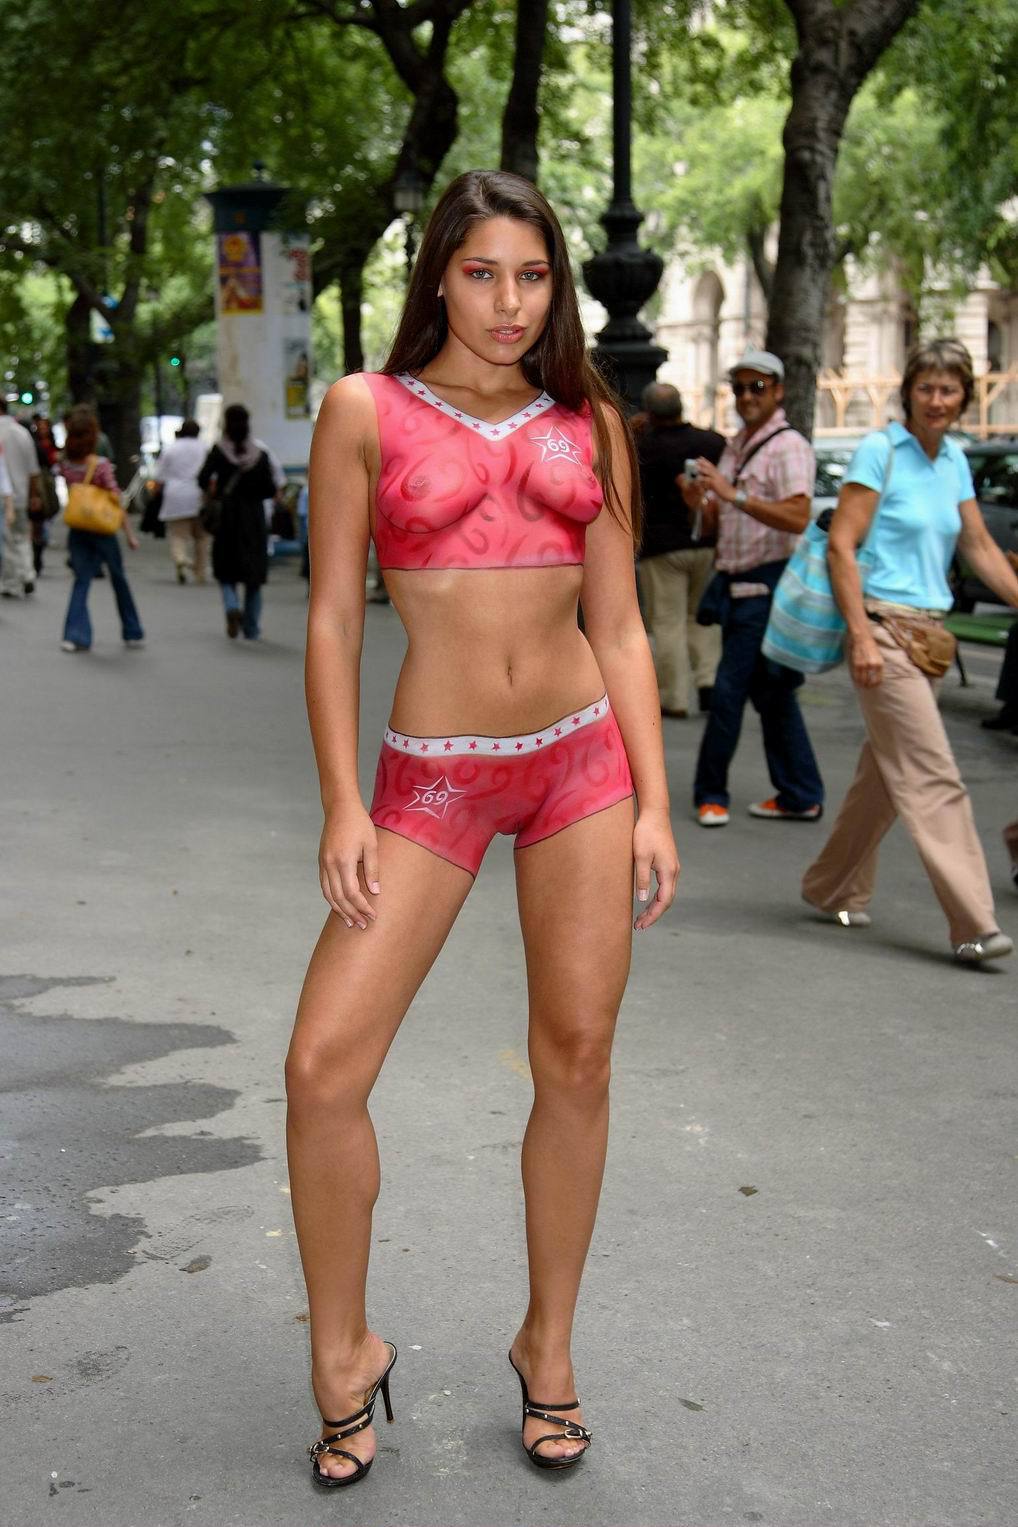 spanish free tubes look excite and delight spanish #brunette #exposedpussy #outdoors #publicnudity #shortskirt #wedgeheels